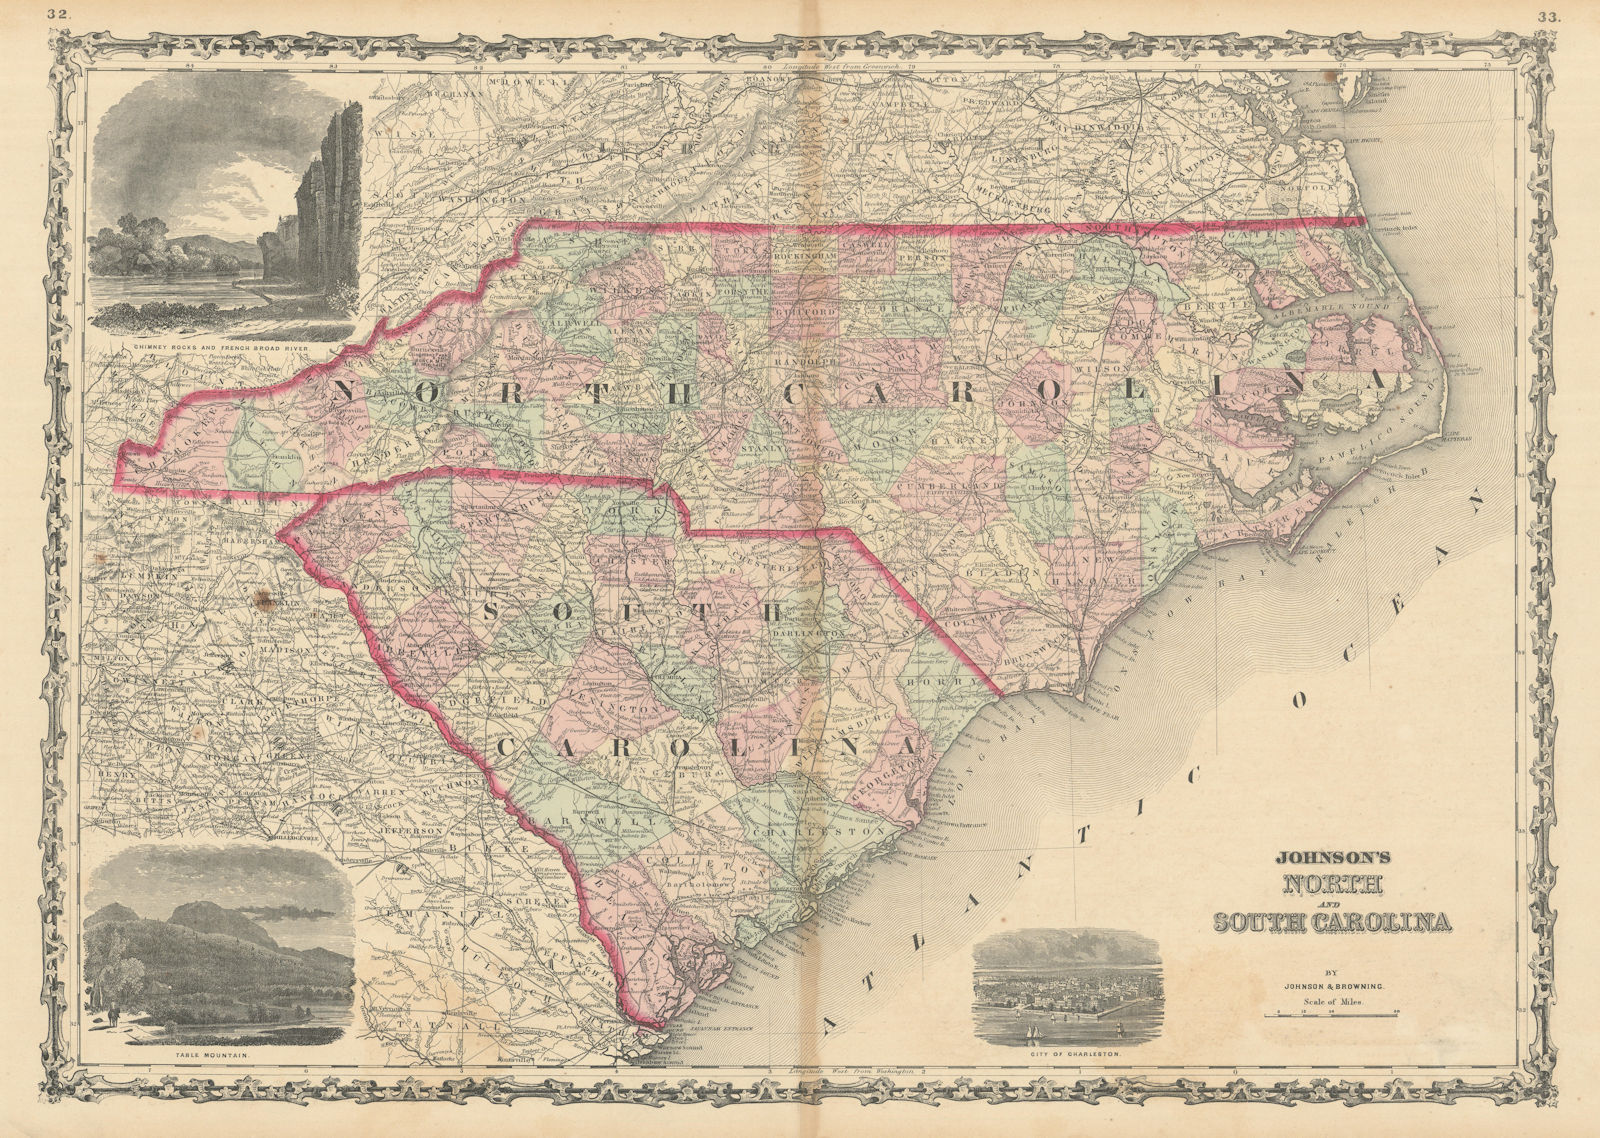 Associate Product Johnson's North & South Carolina showing counties. US state map 1861 old